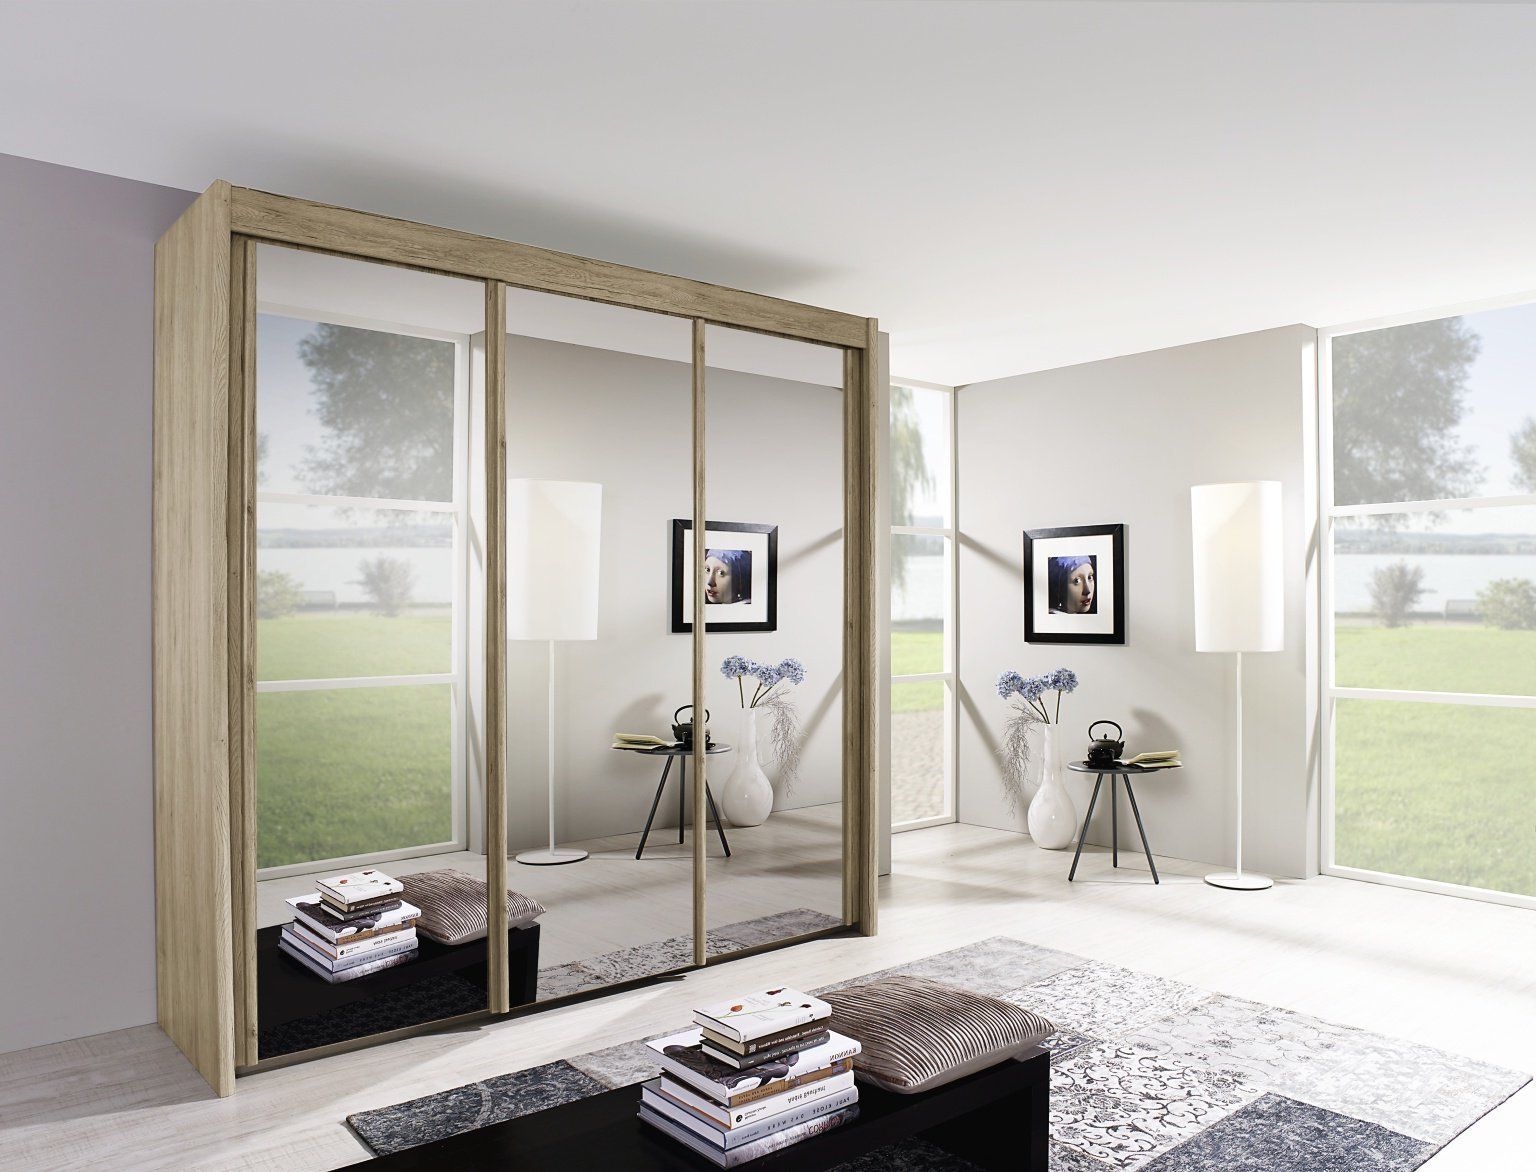 Imperial 300cm Sliding 3 Door Wardrobe | Eyres Furniture Intended For Three Door Mirrored Wardrobes (View 8 of 20)